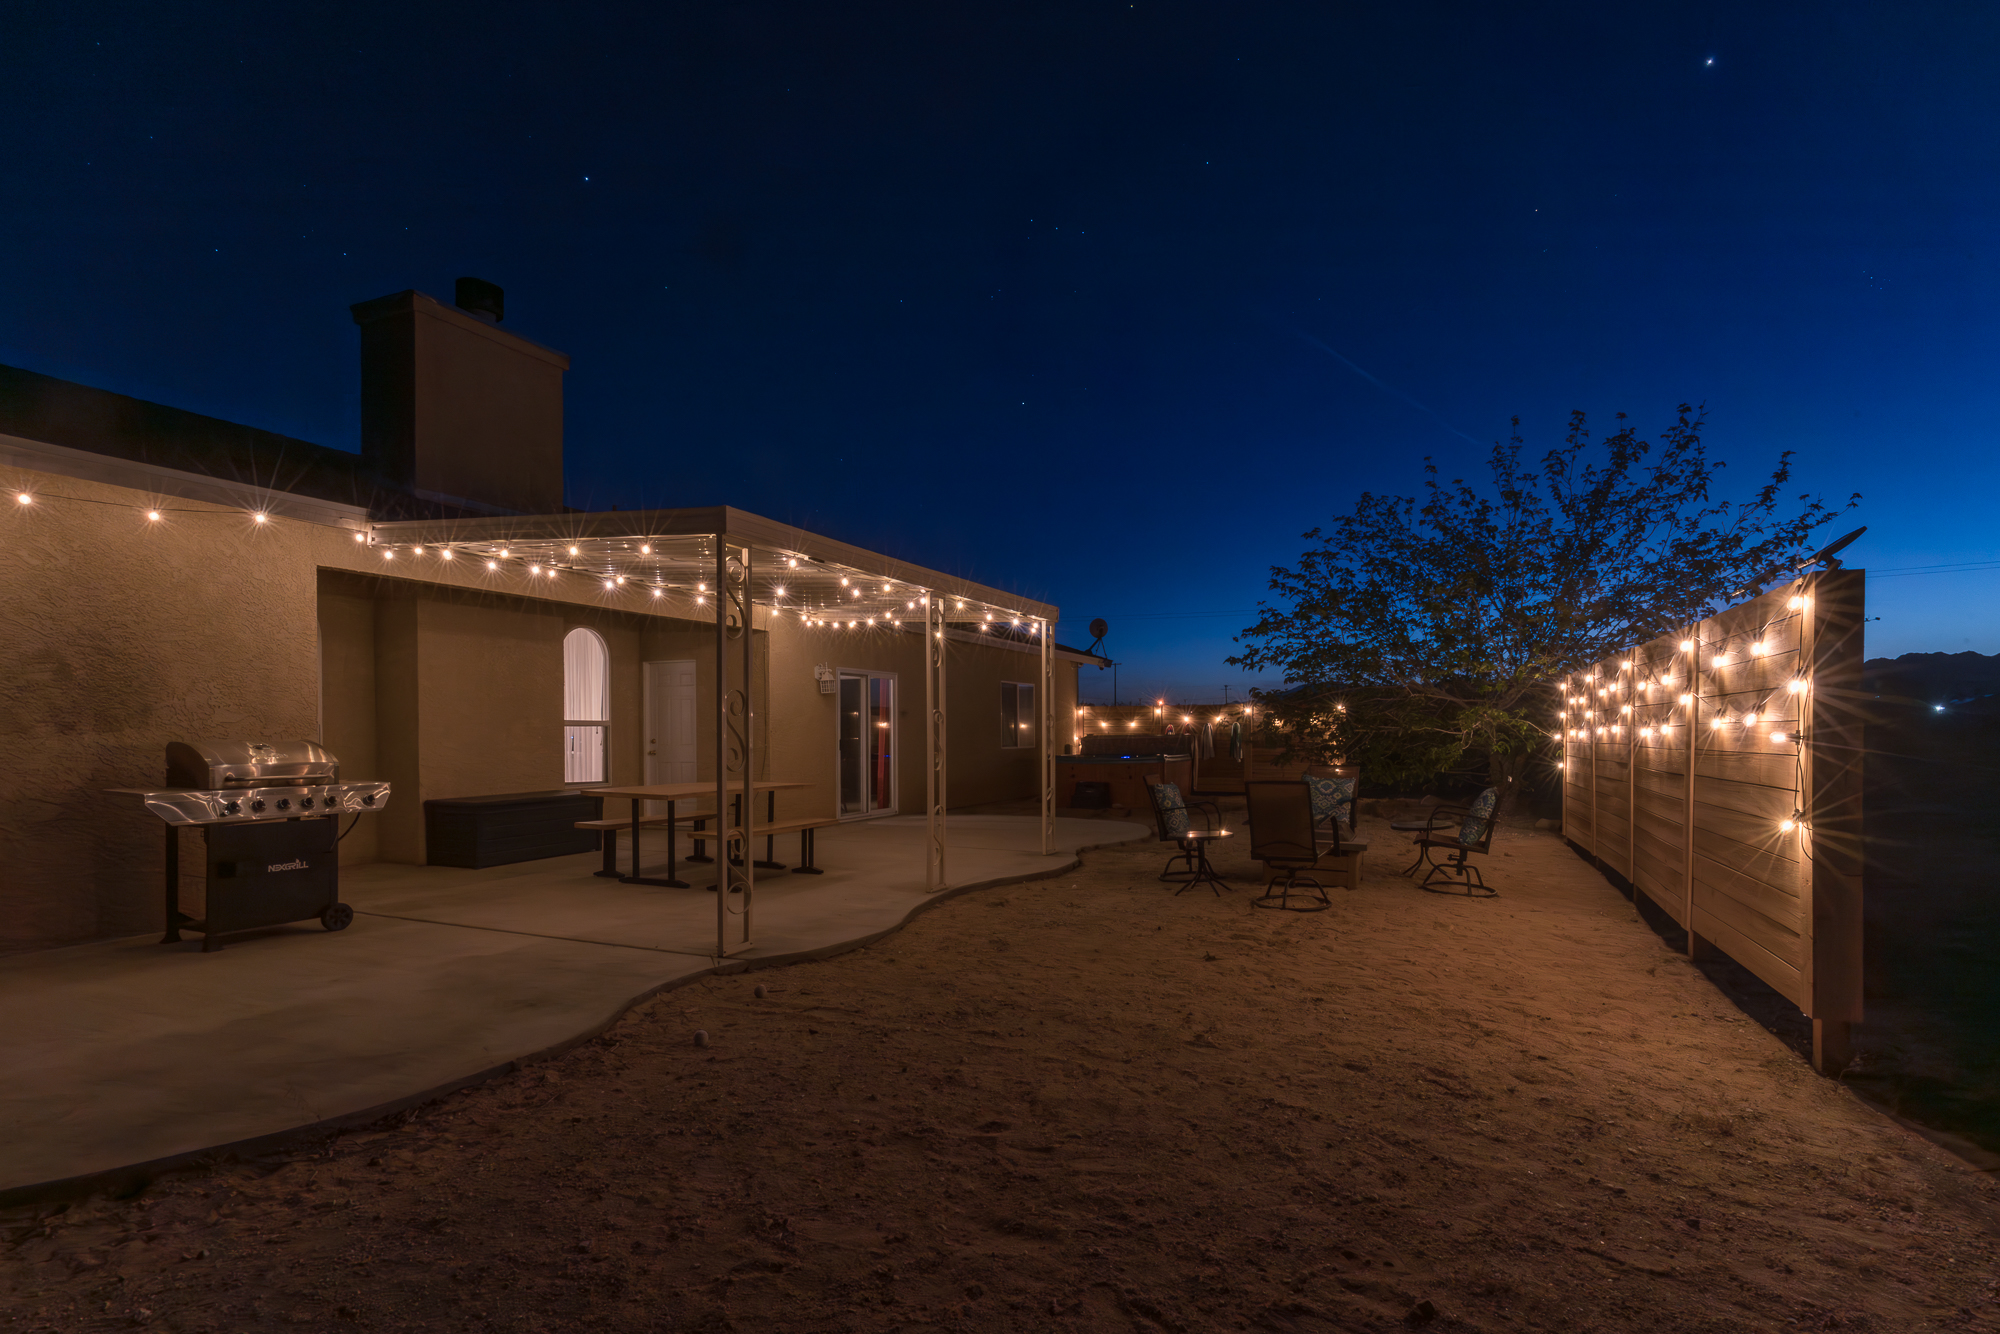 view of the backyard at civil twilight with solar lighting, firepit area, covered patio and a hot tub